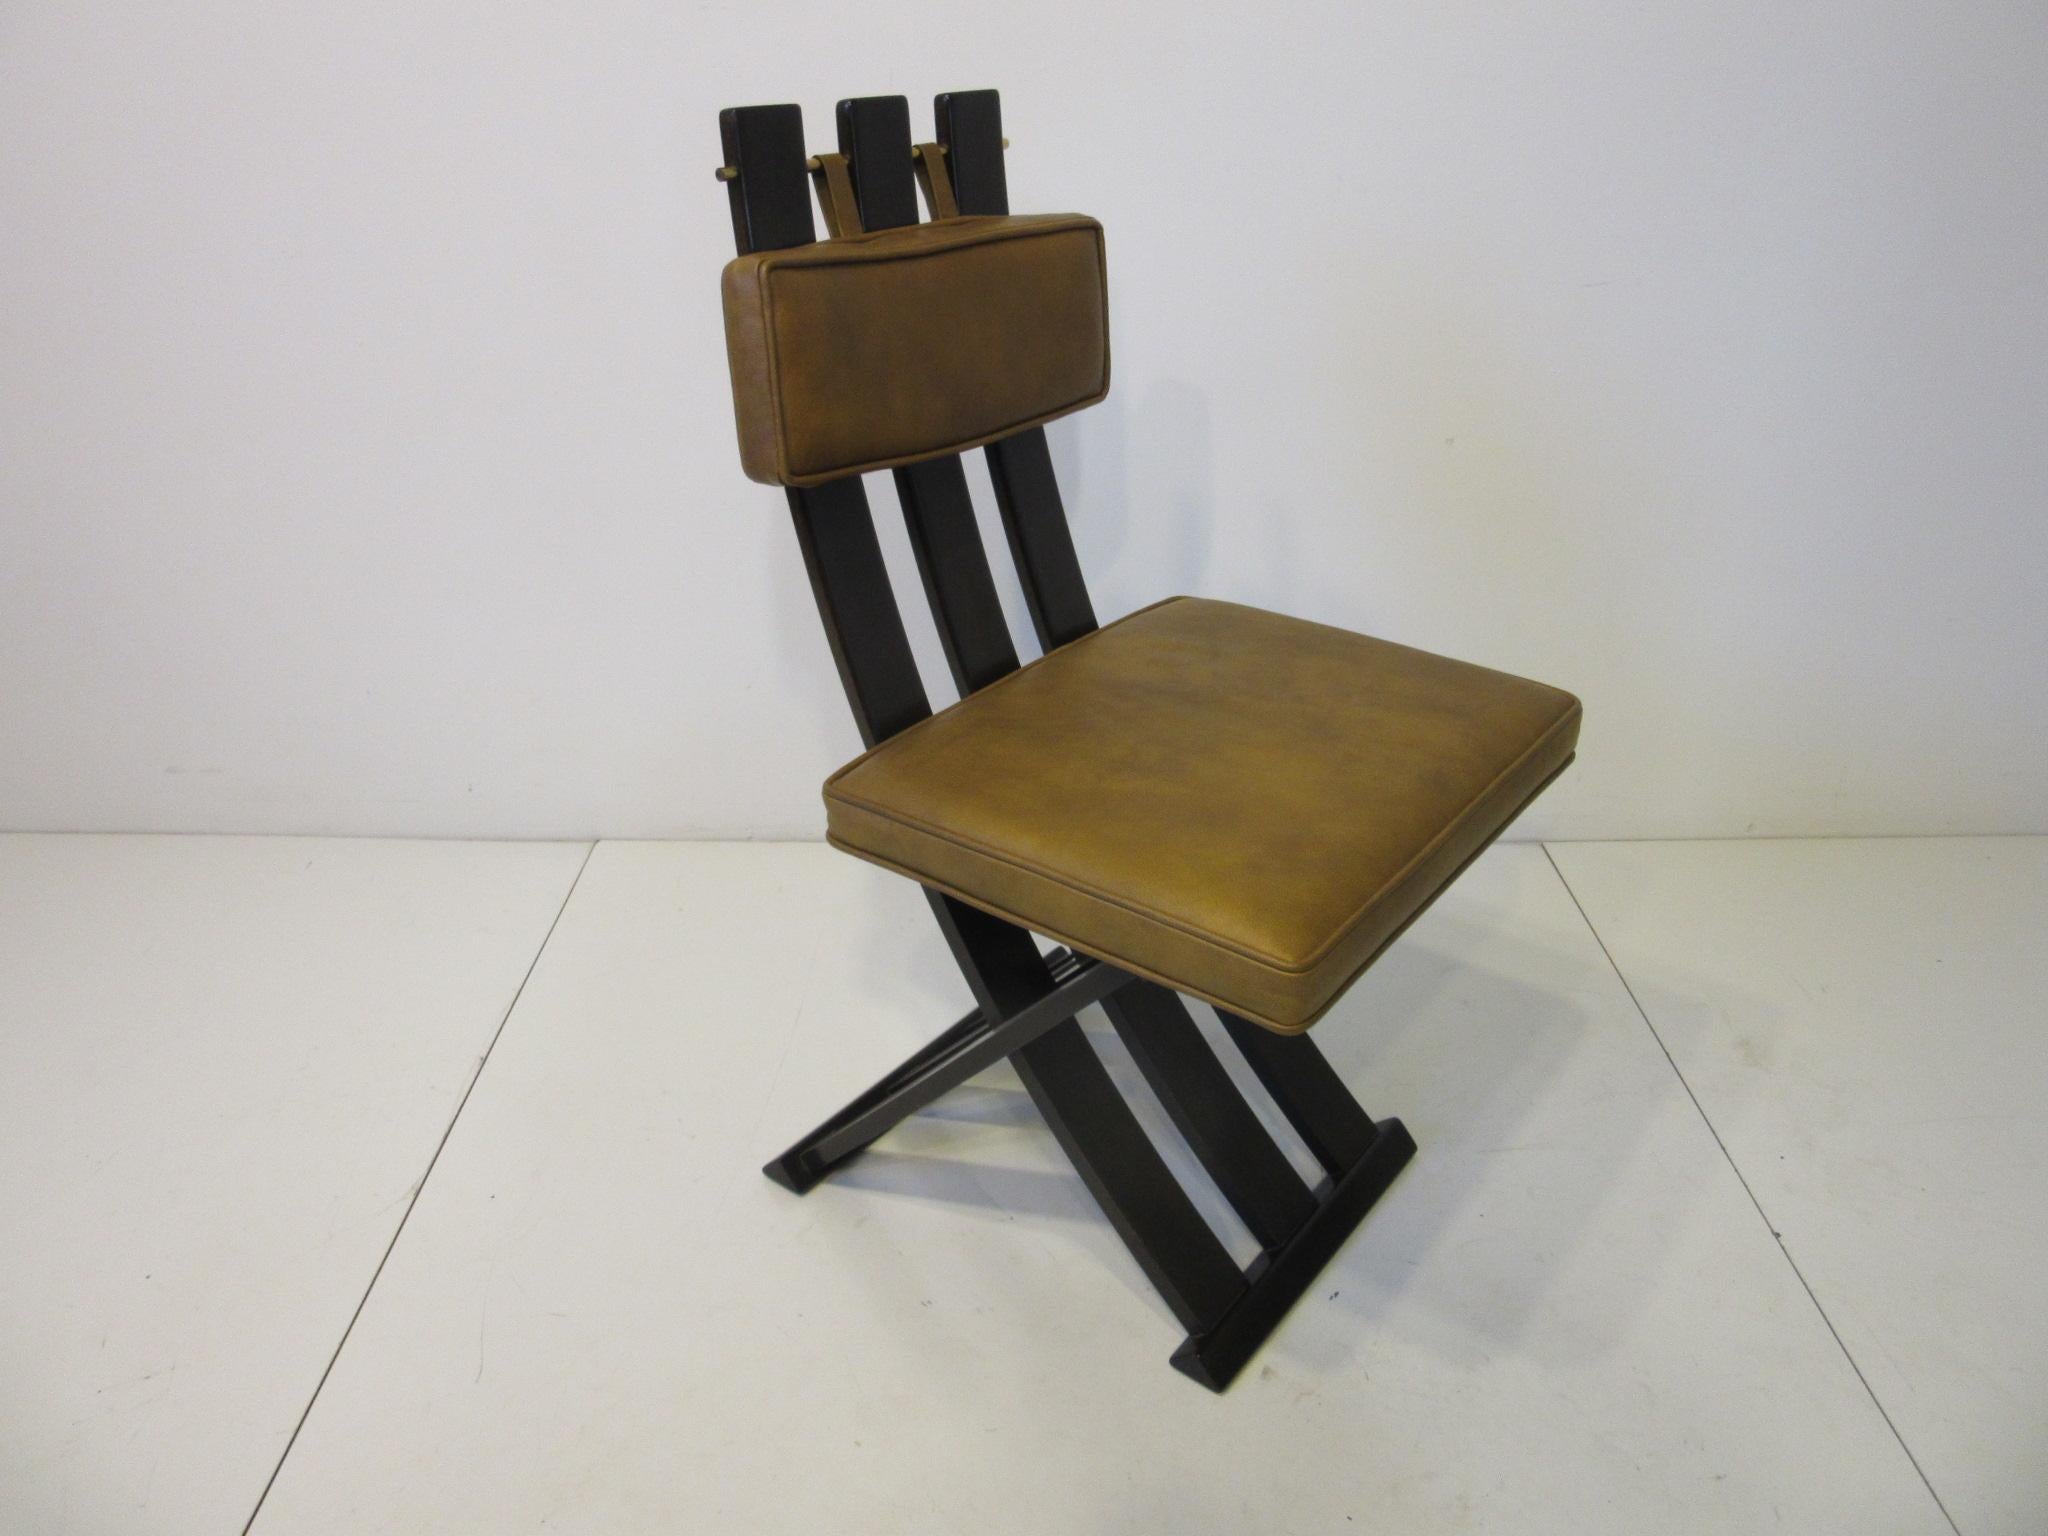 A set of four ebonized mahogany framed X chairs having leatherette back and bottom cushions with brass rod detail holding the slats and cushion. A sophisticated design that is well crafted and of high quality in the manner of Dunbar and Widdicomb,